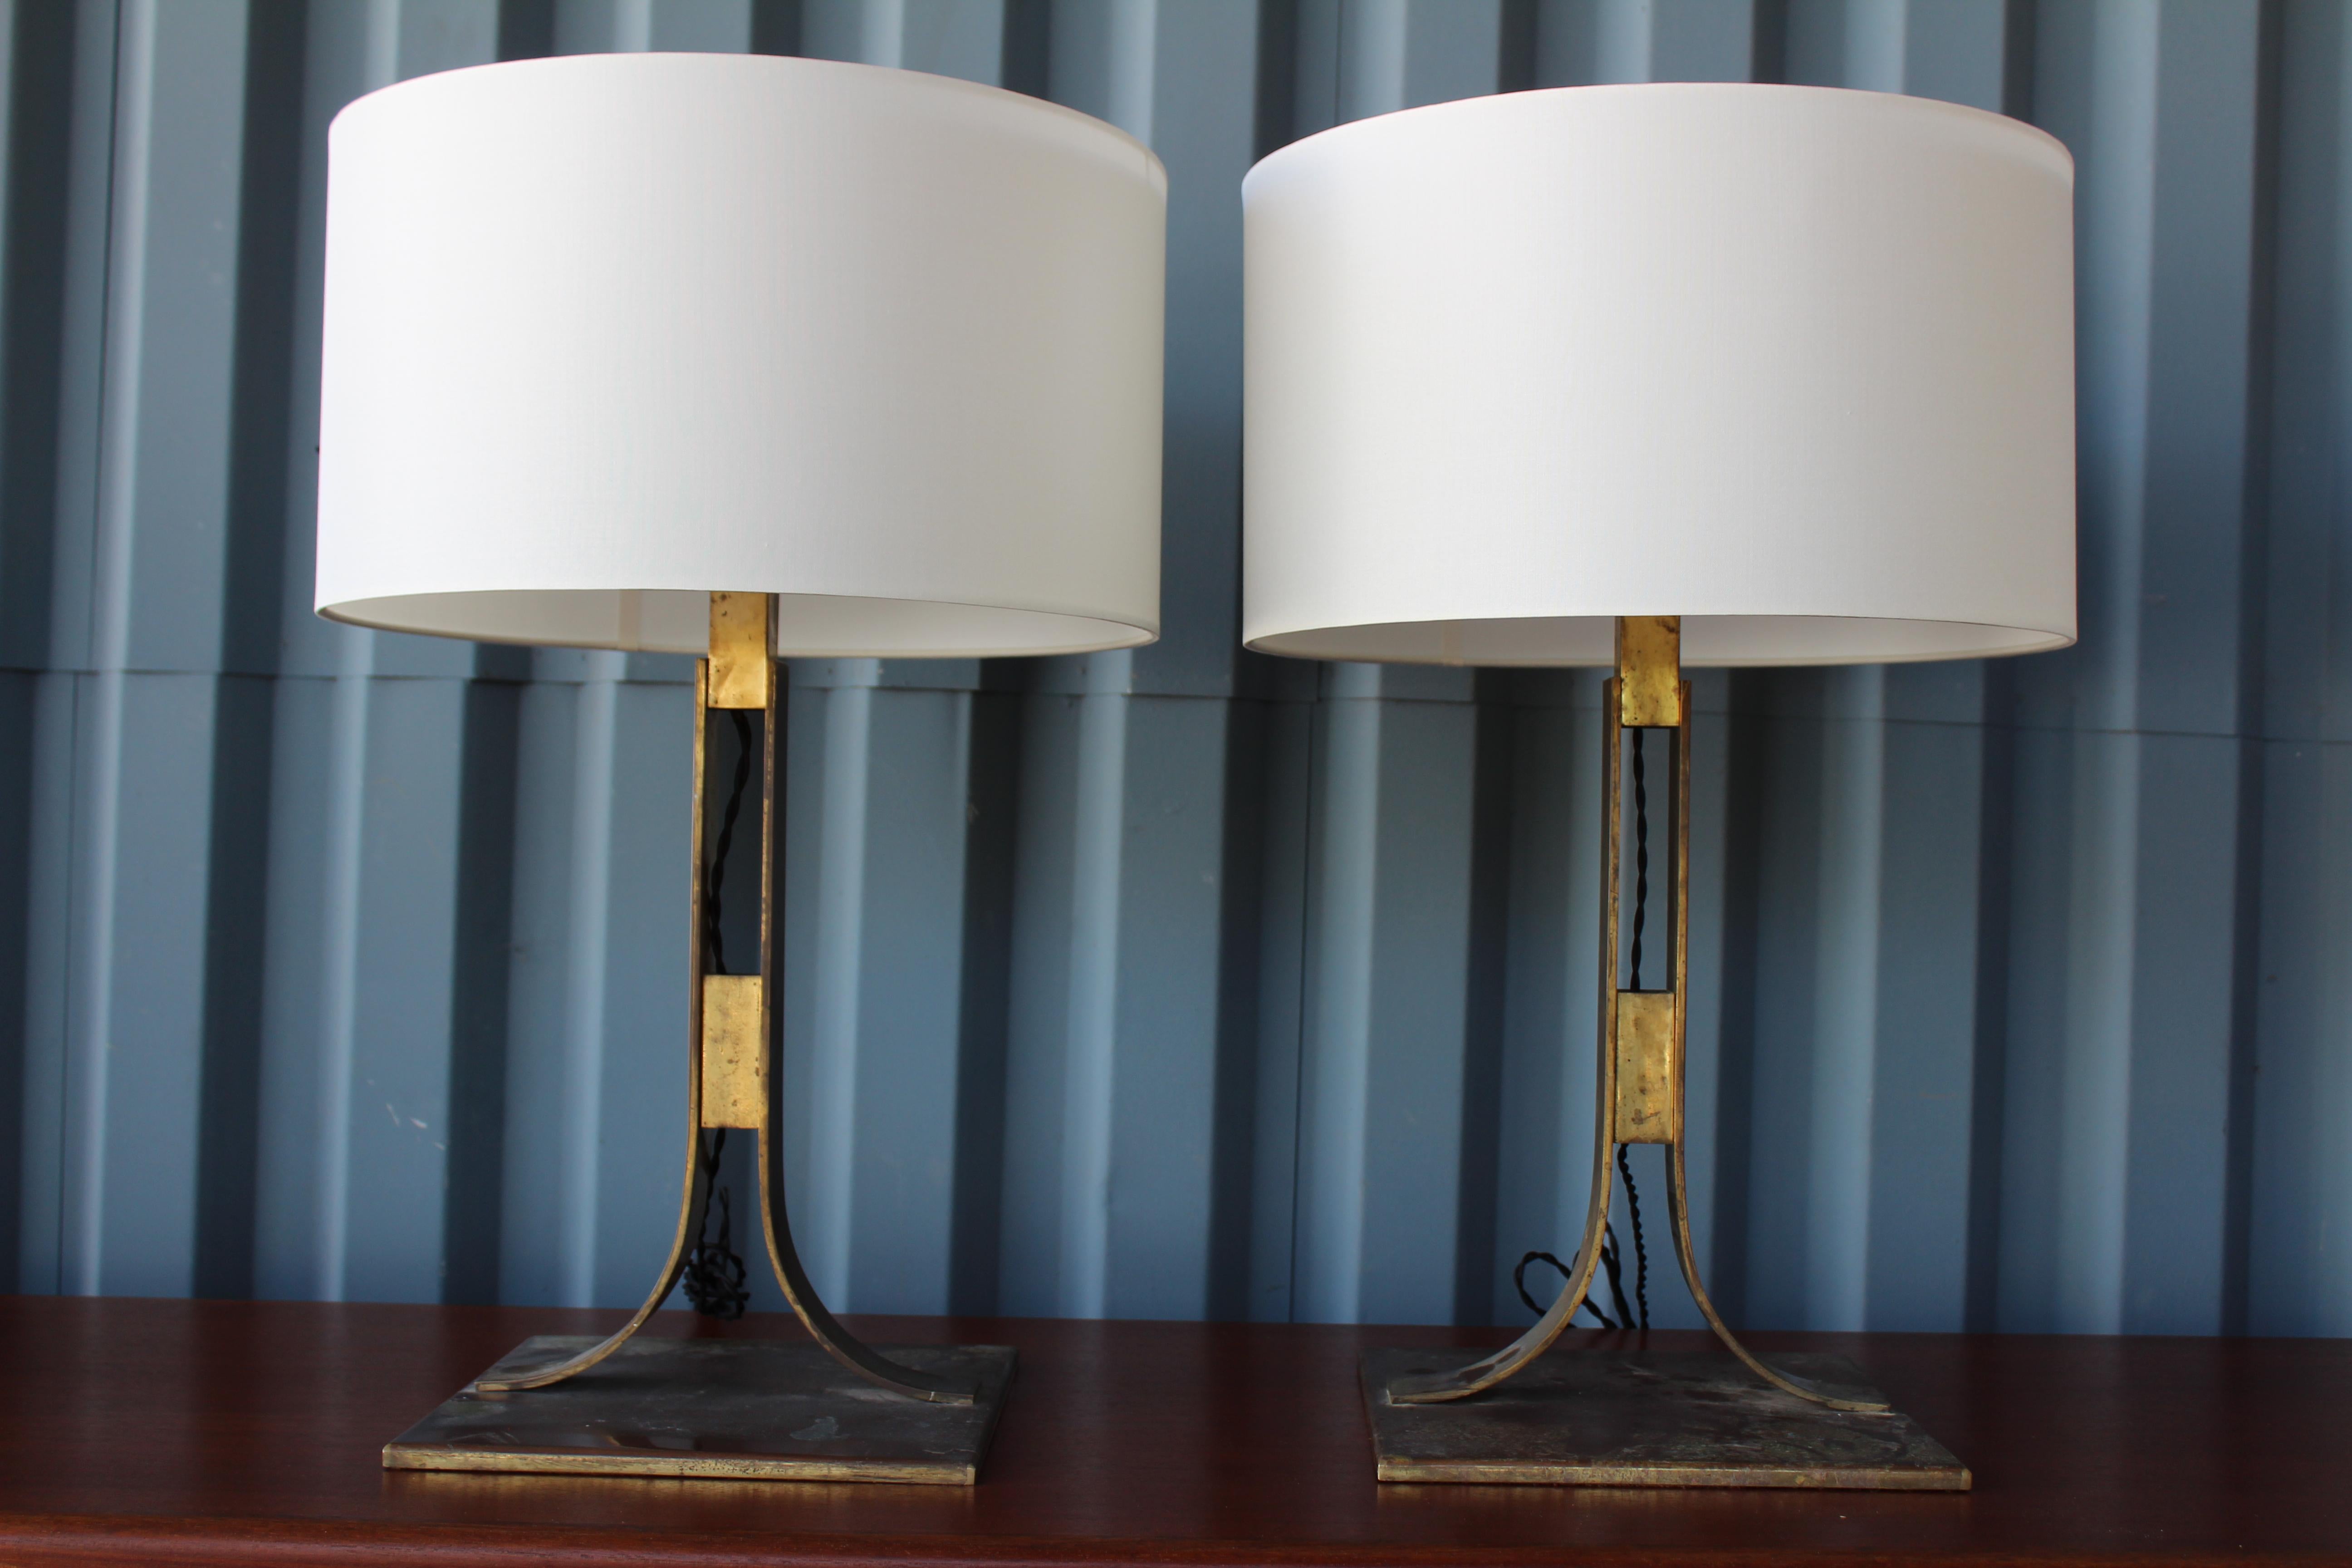 Pair of solid brass table lamps with original heavy patina. Each lamp has two bulbs. The pair have been recently rewired and feature new silk shades with top diffusers.